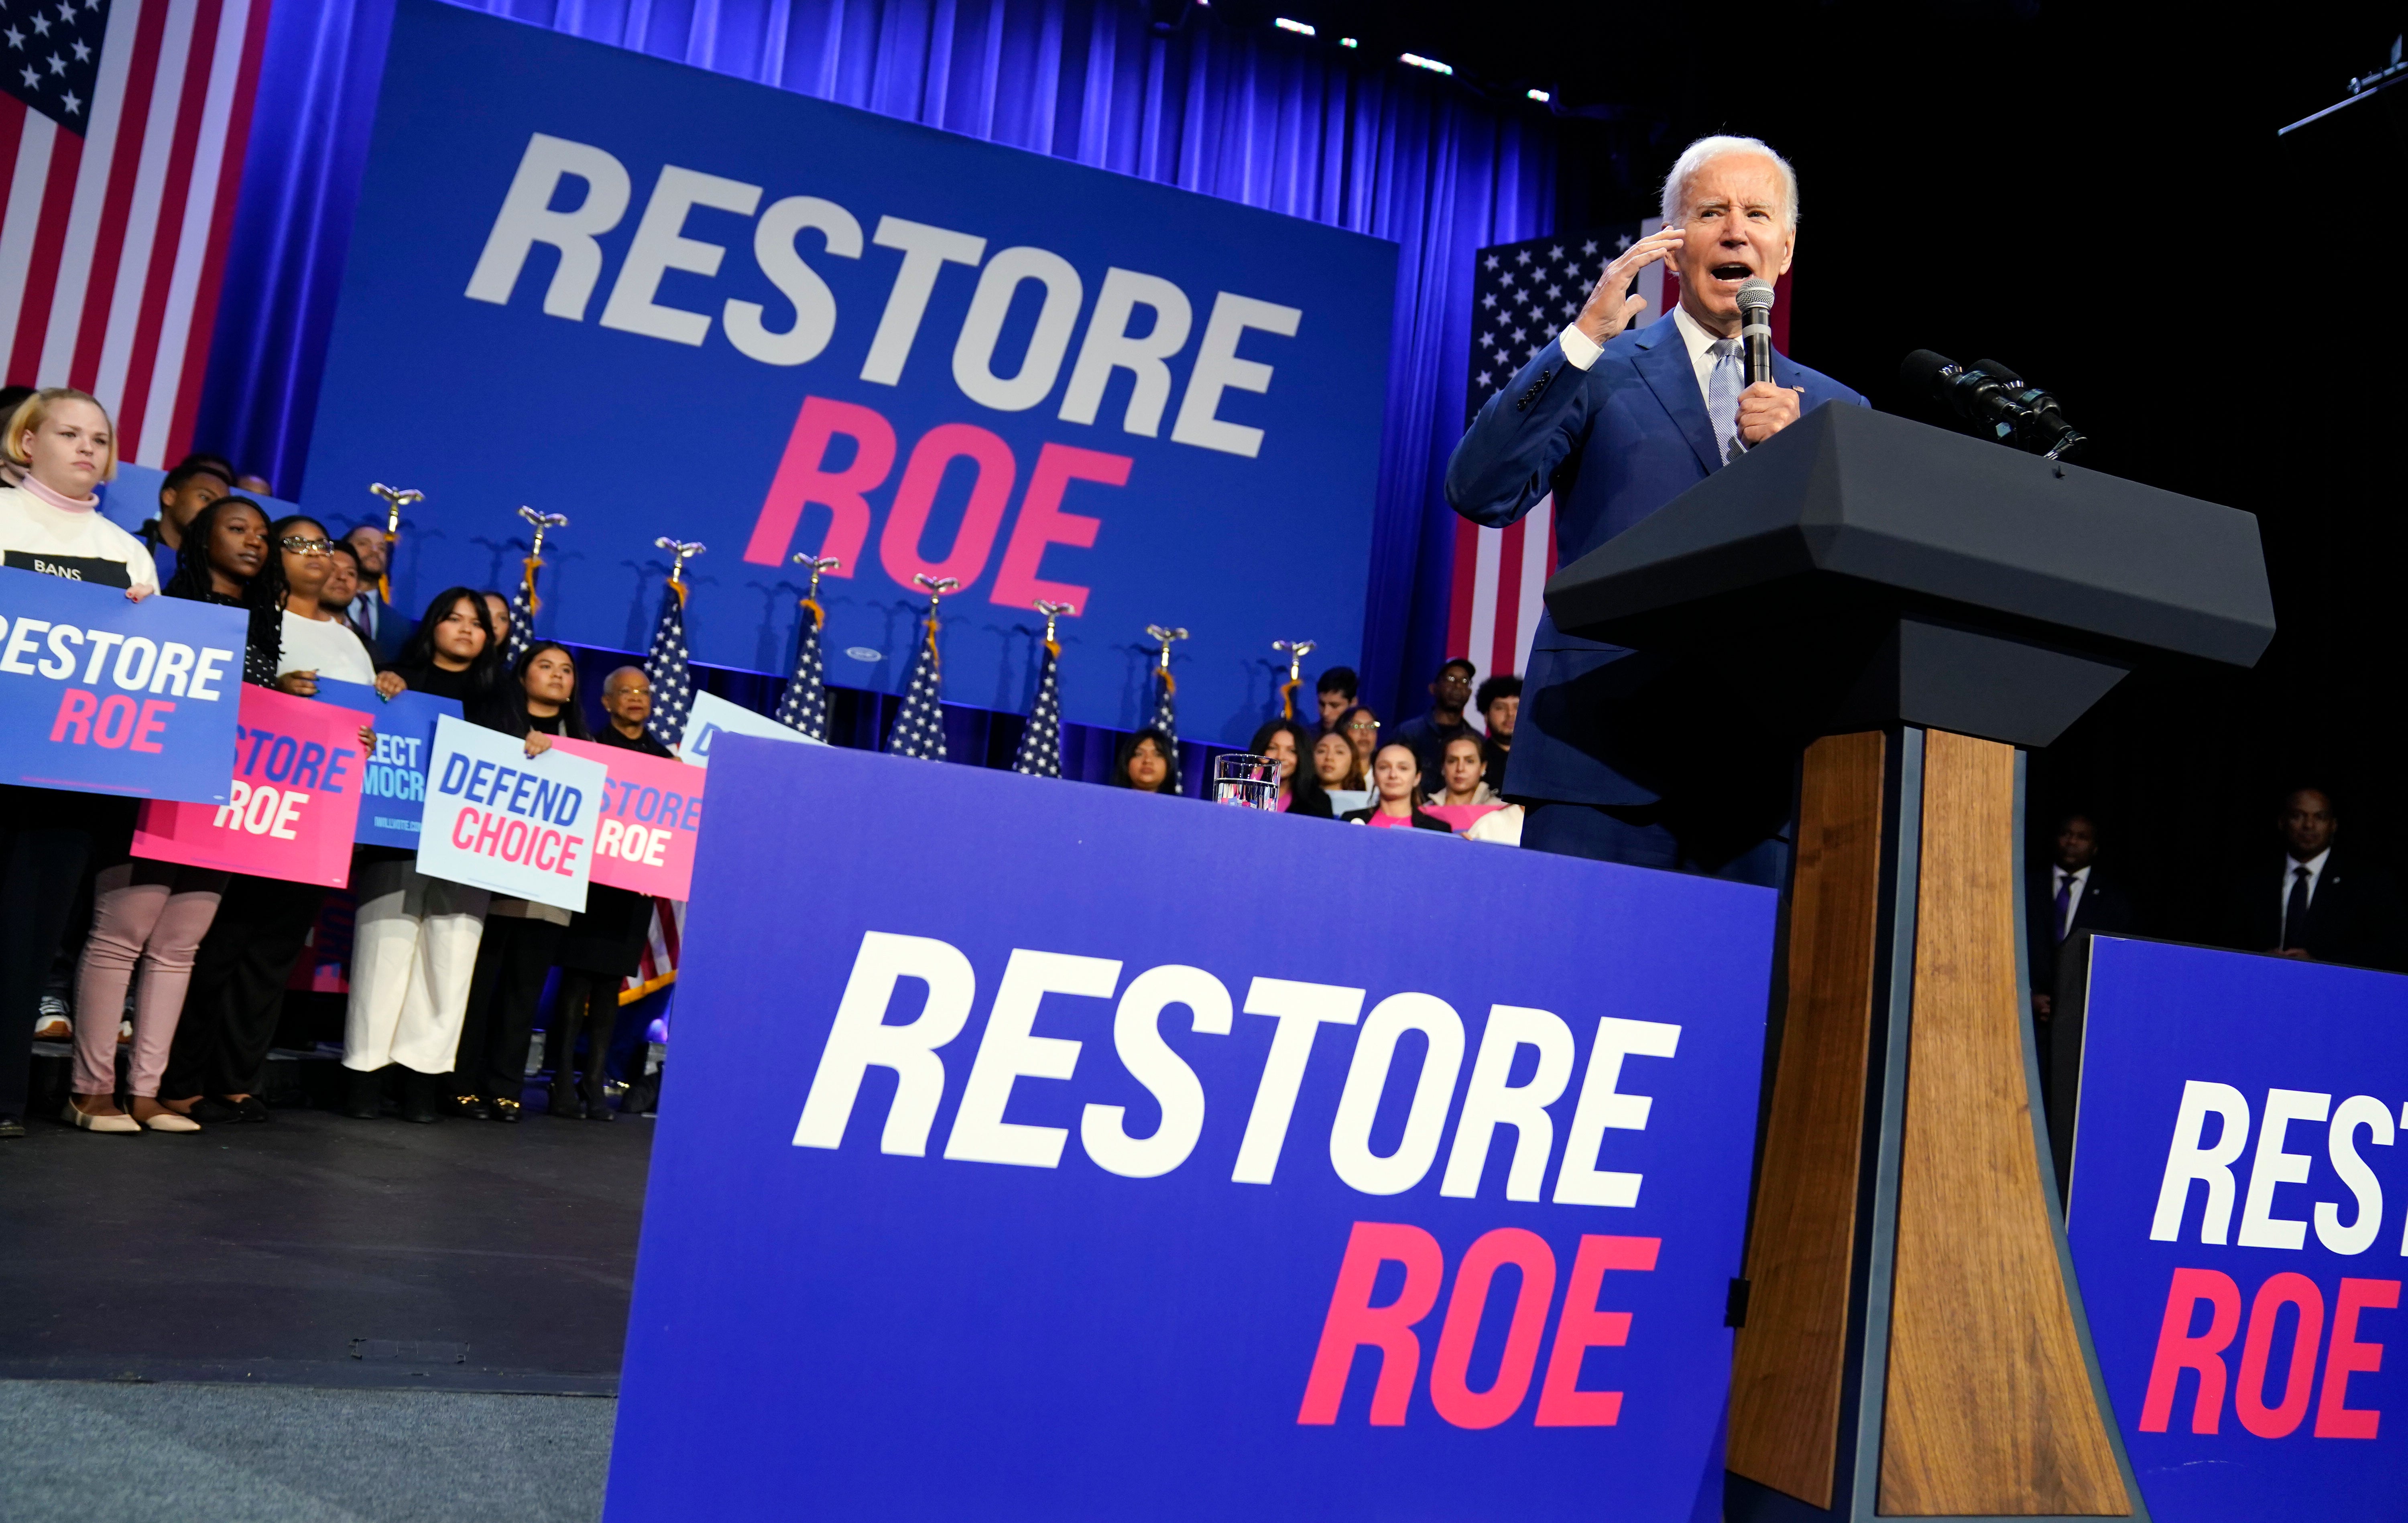 President Joe Biden and Democratic candidates are expected to make abortion rights a central part of 2024 campaigns, in contrast with Republican plans to restrict access.